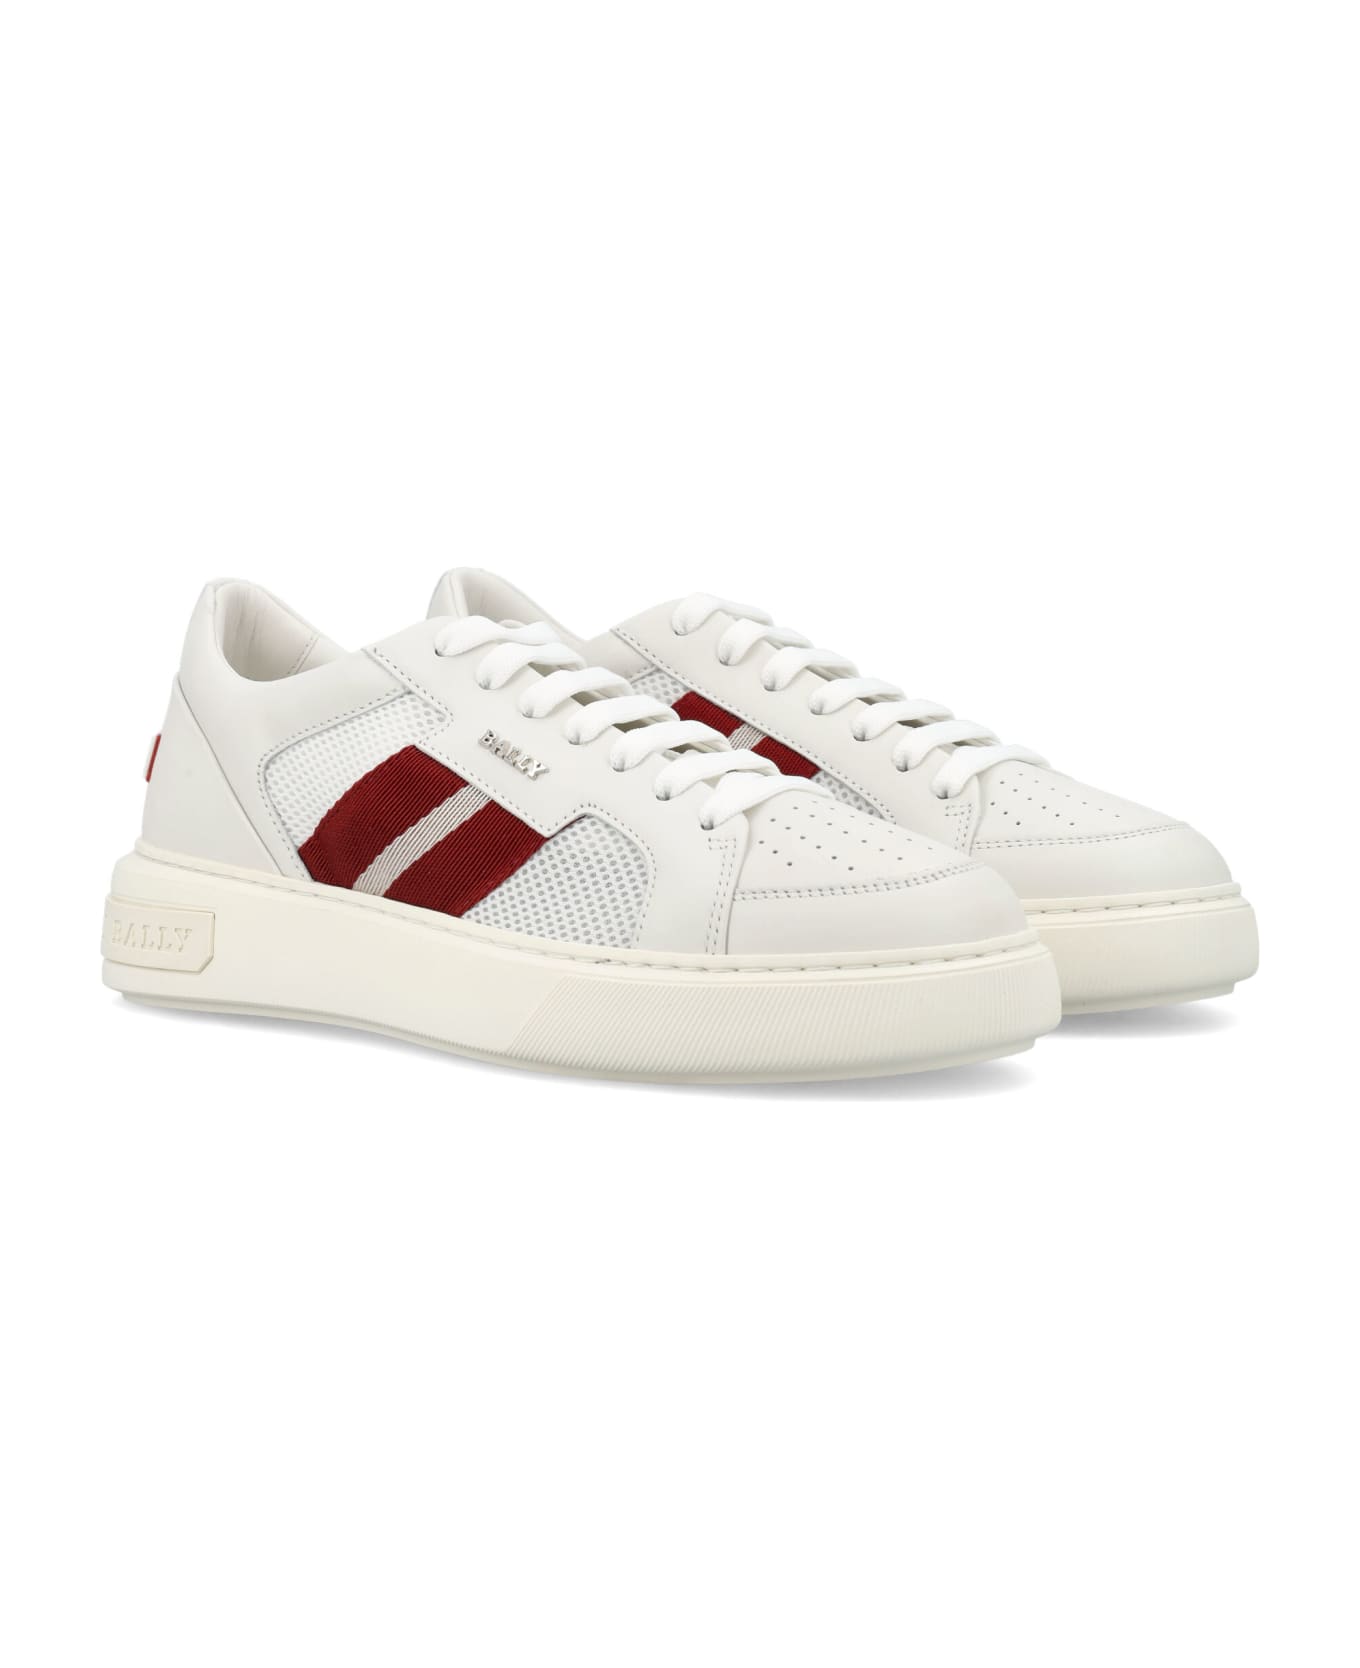 Bally Melys-t Leather Sneakers - 0300 WHITE